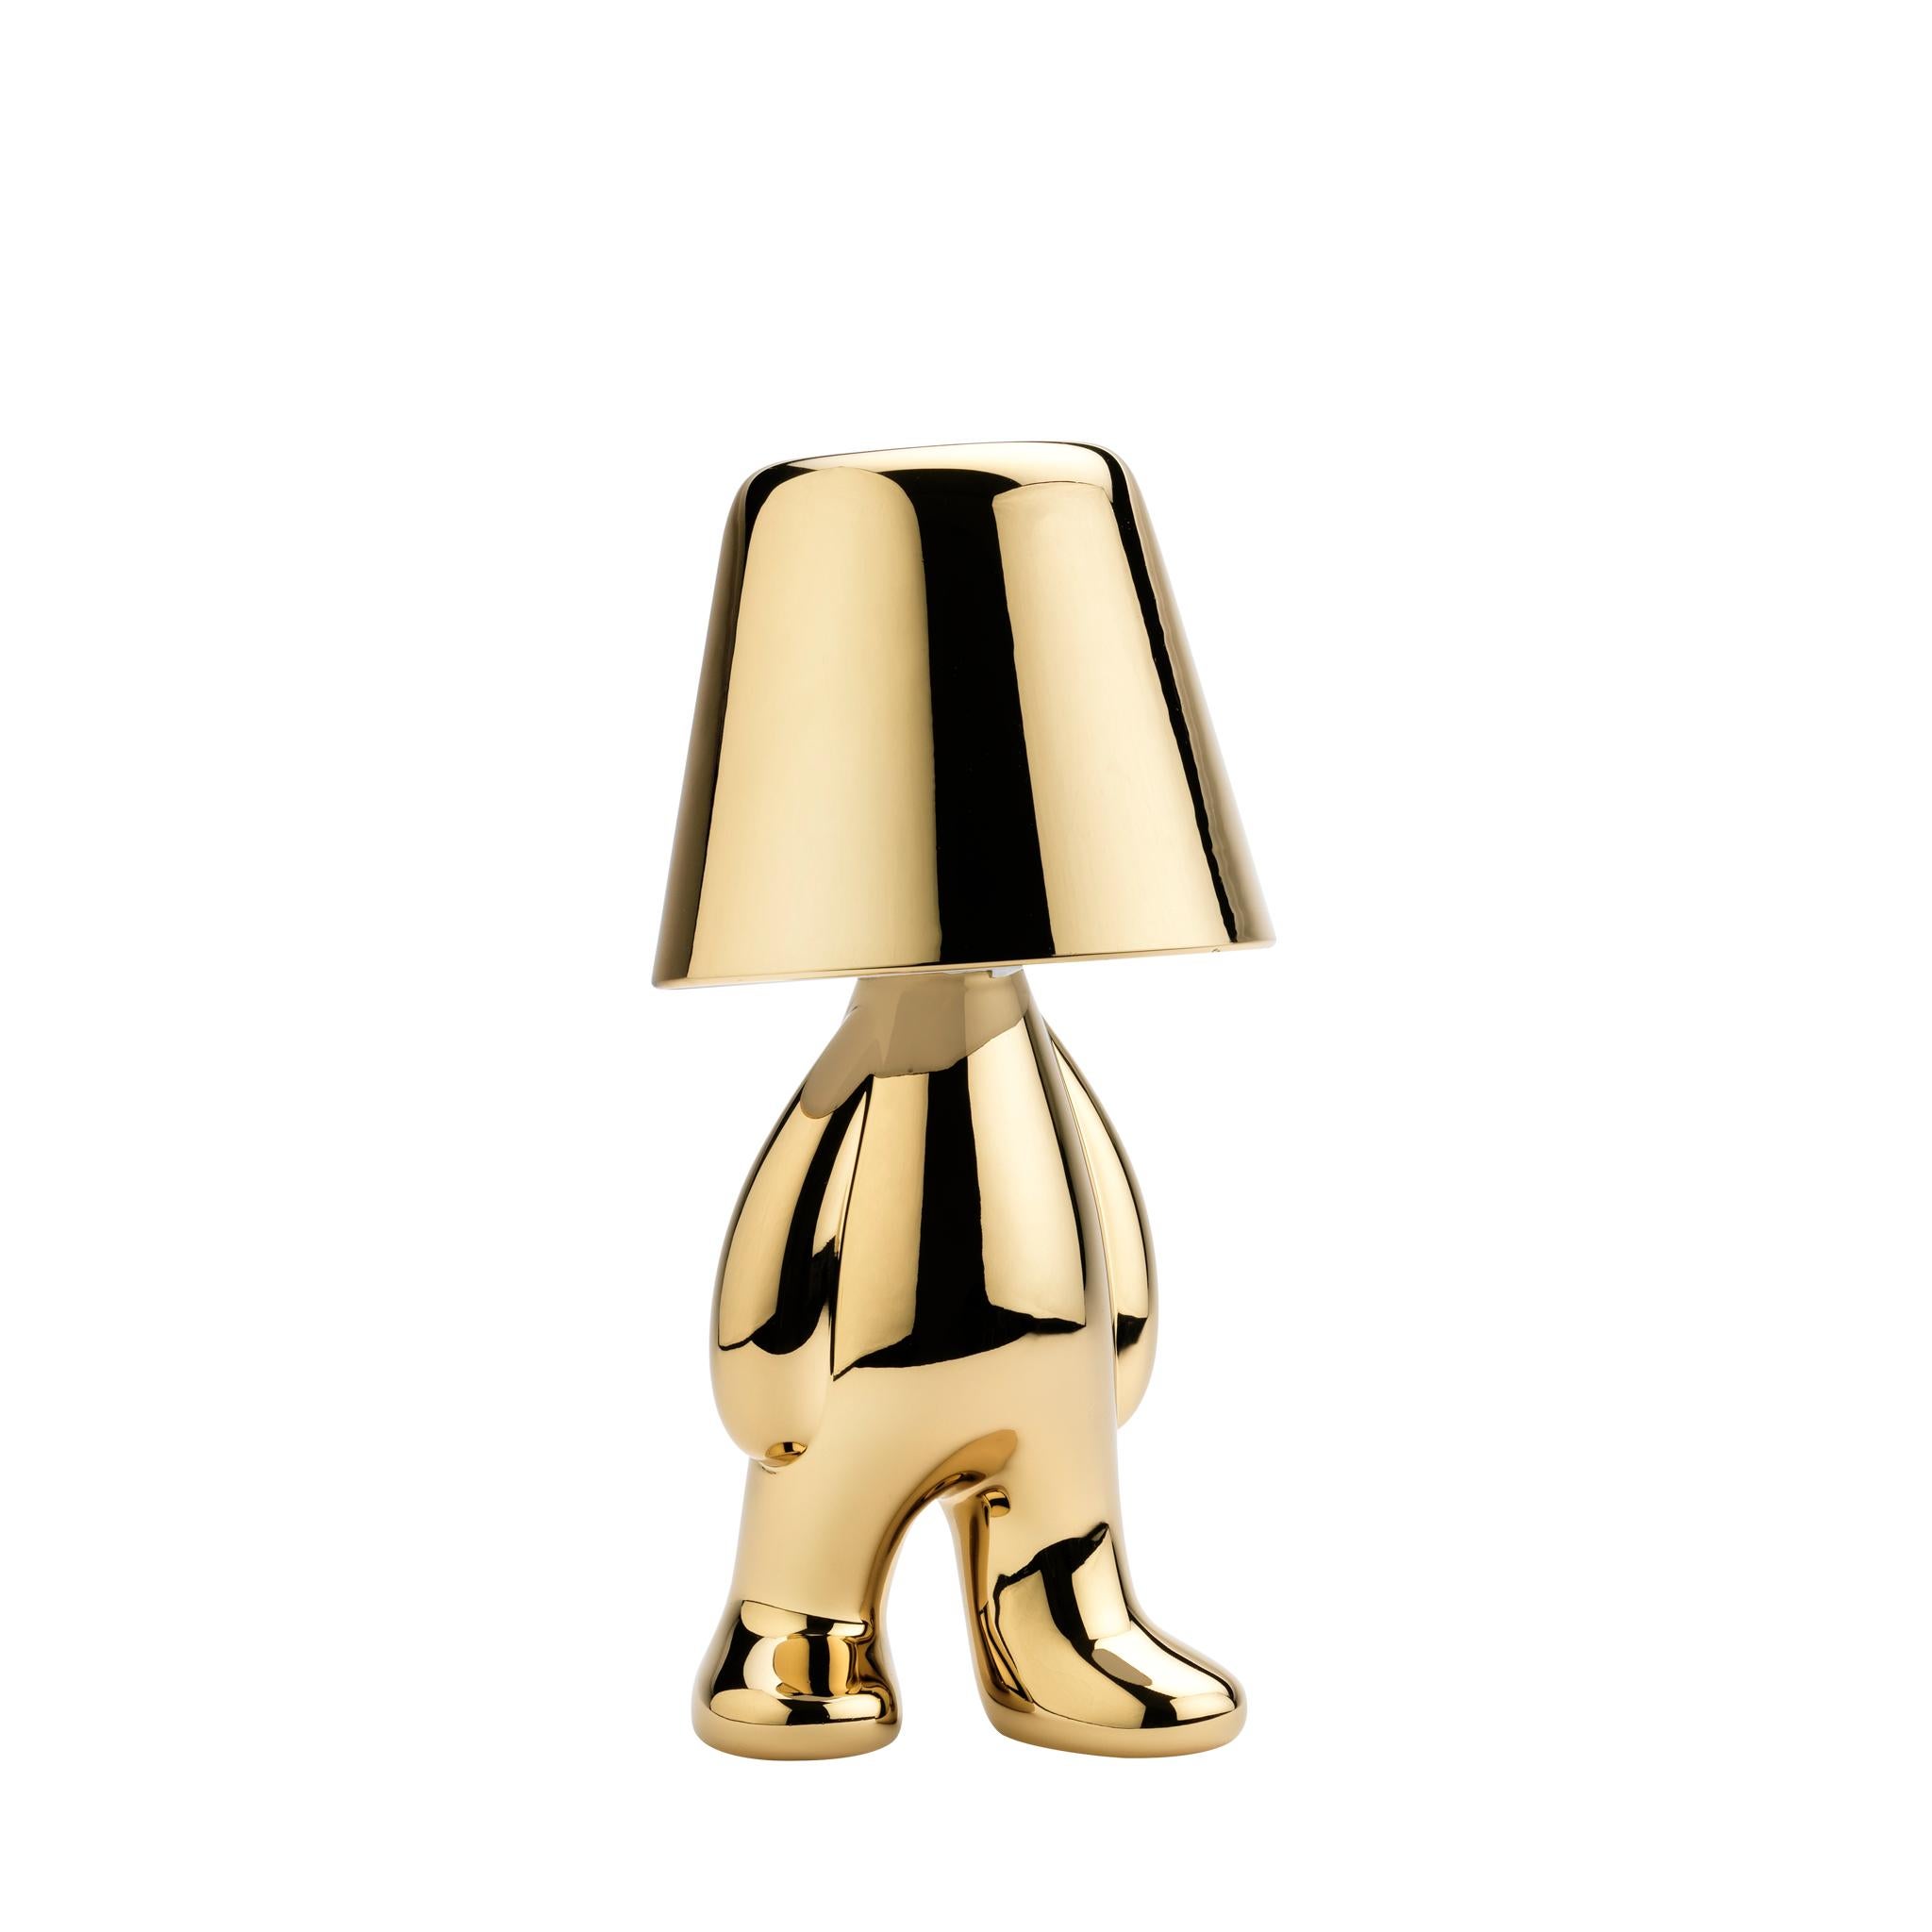 This Golden Brothers is called Tom.

Designed by Stefano Giovannoni, Golden Brothers is a family of lamp-characters which, reflecting a soft light on their body, enhance the plasticity and fluidity of the silhouette. The Golden Brothers, assuming